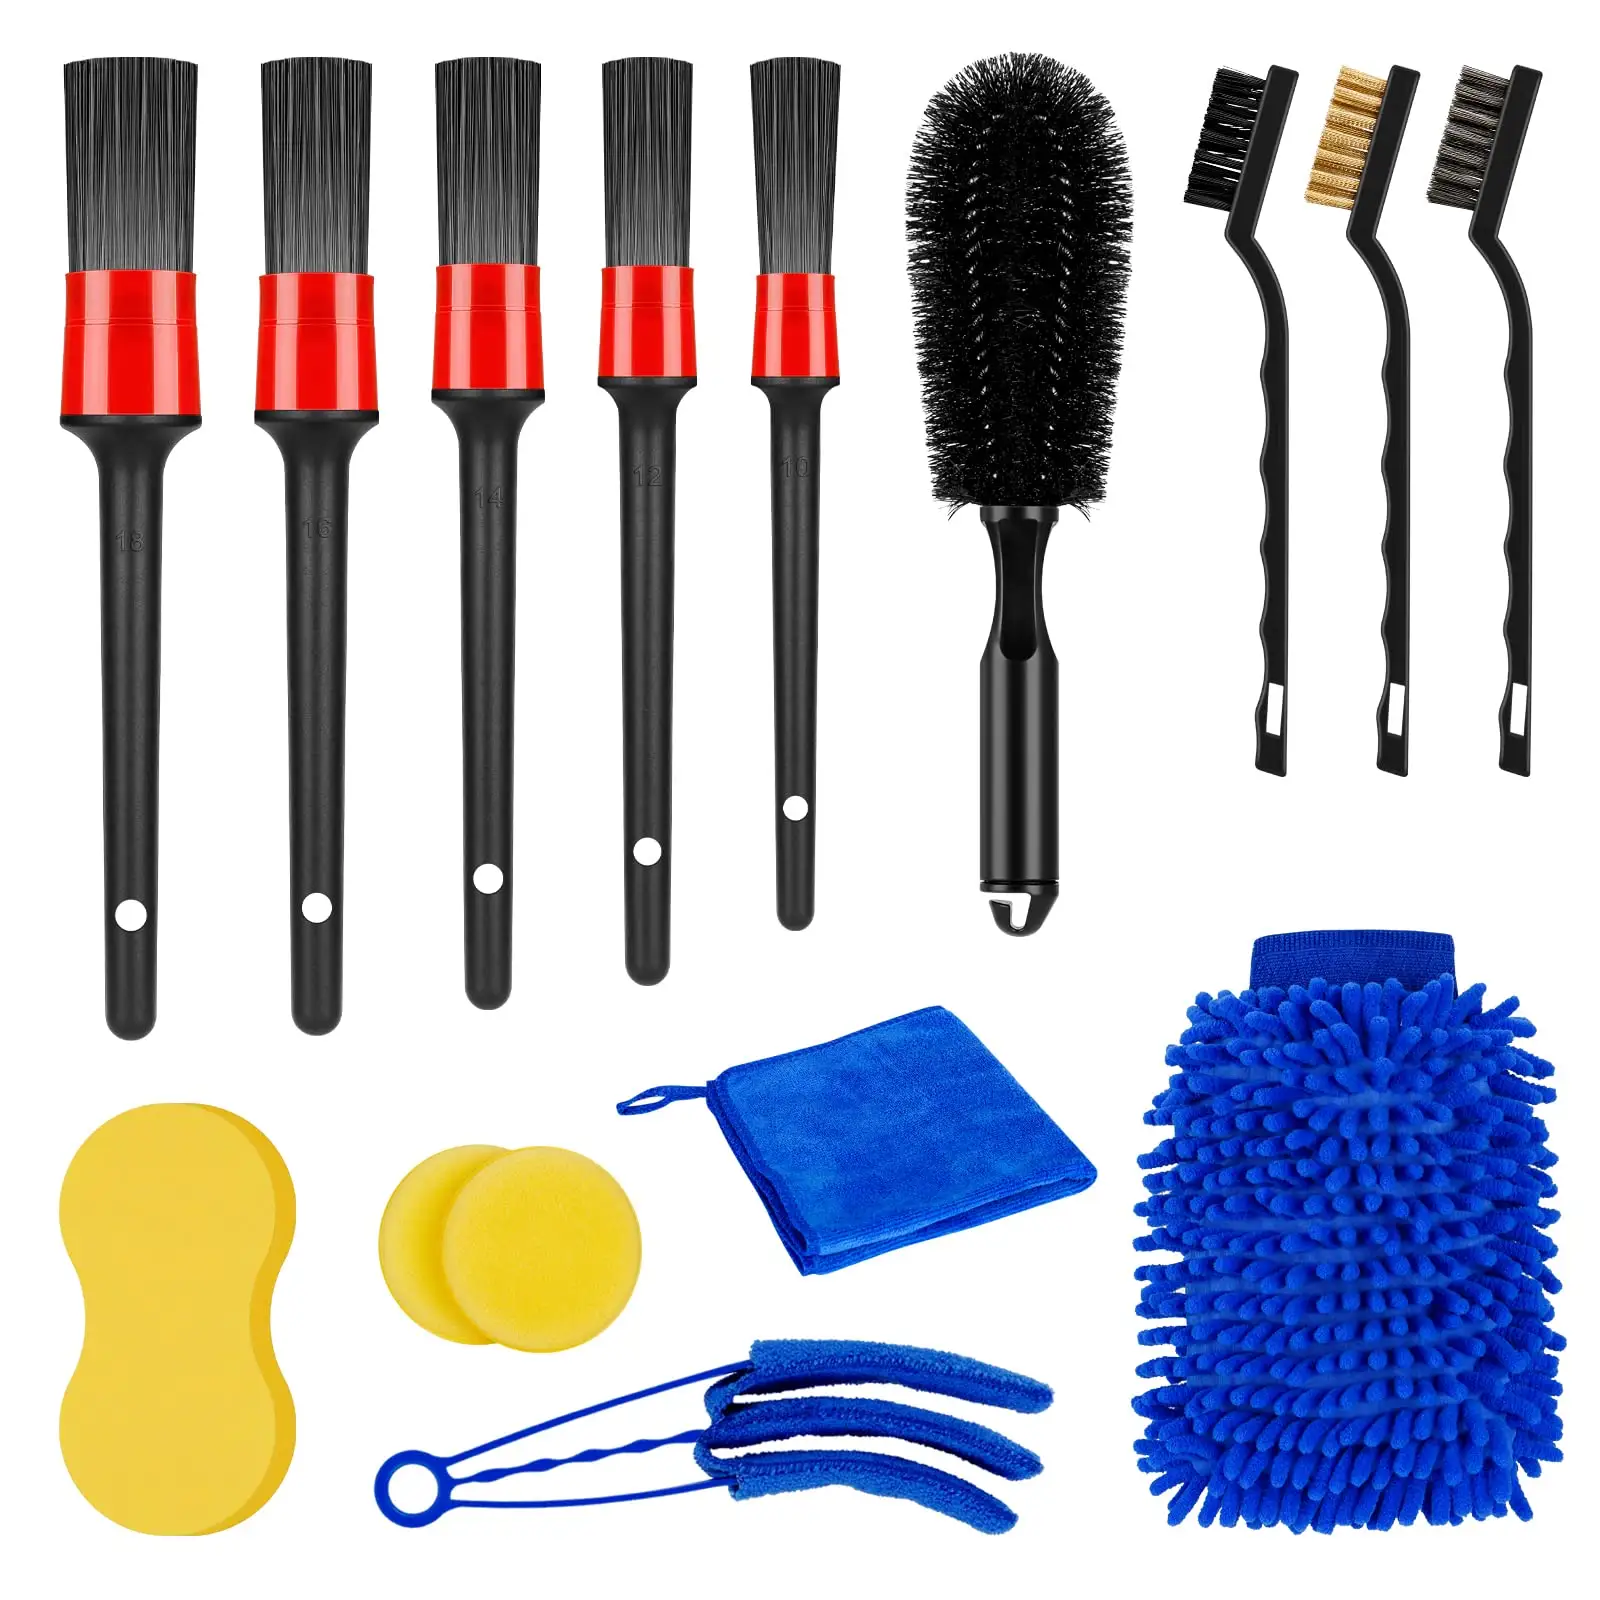 15 Pieces Rim Brush Car Detailing Set  and Microfiber Cloths for Tyres and Windows for Indoor and Outdoor Car Care